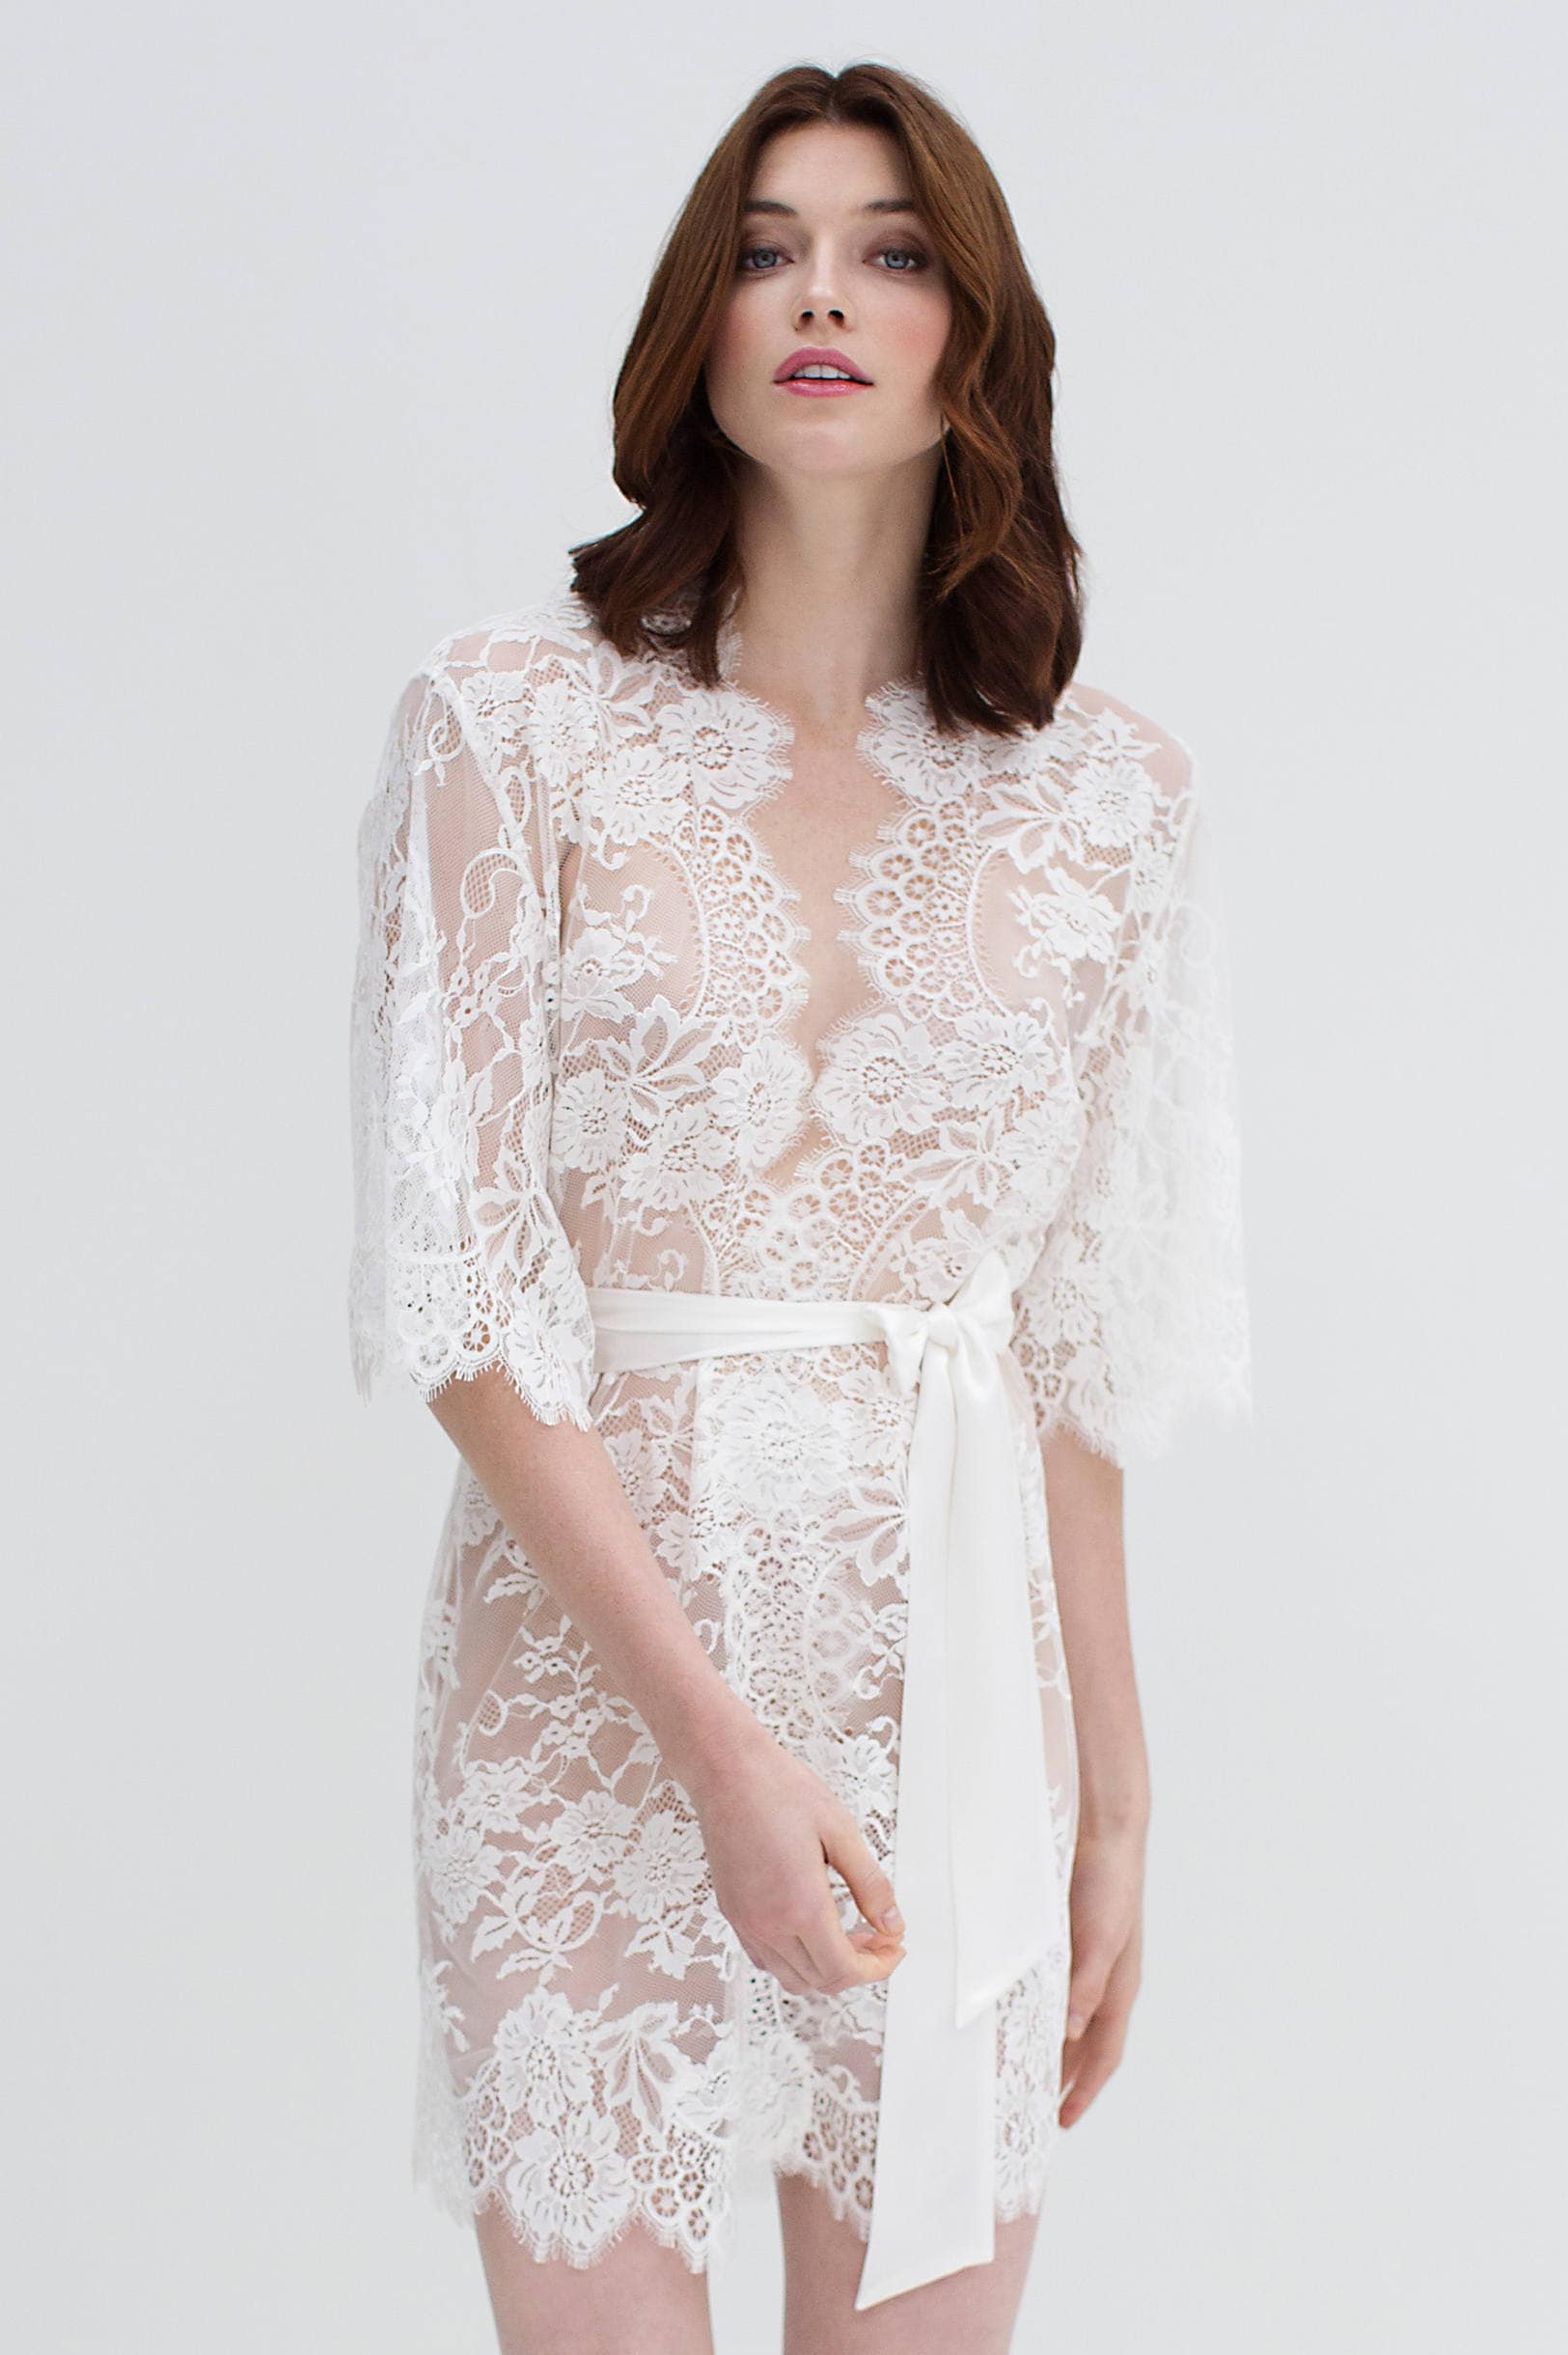 Swan Queen Bridal French Lace Robe in Ivory Style 102SH - Etsy